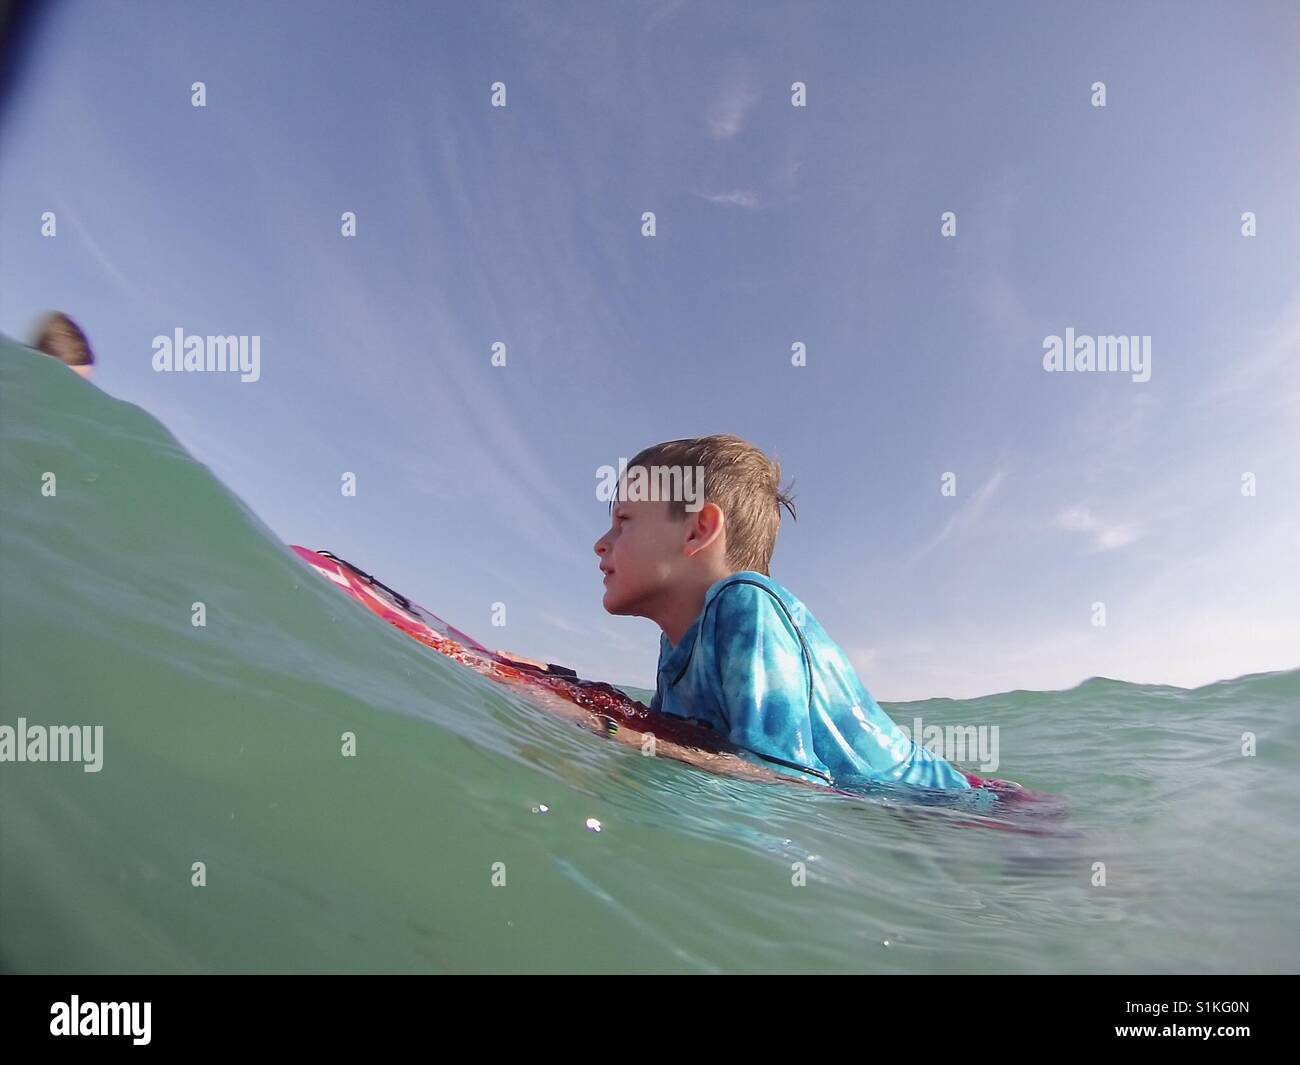 Young boy surfing Stock Photo